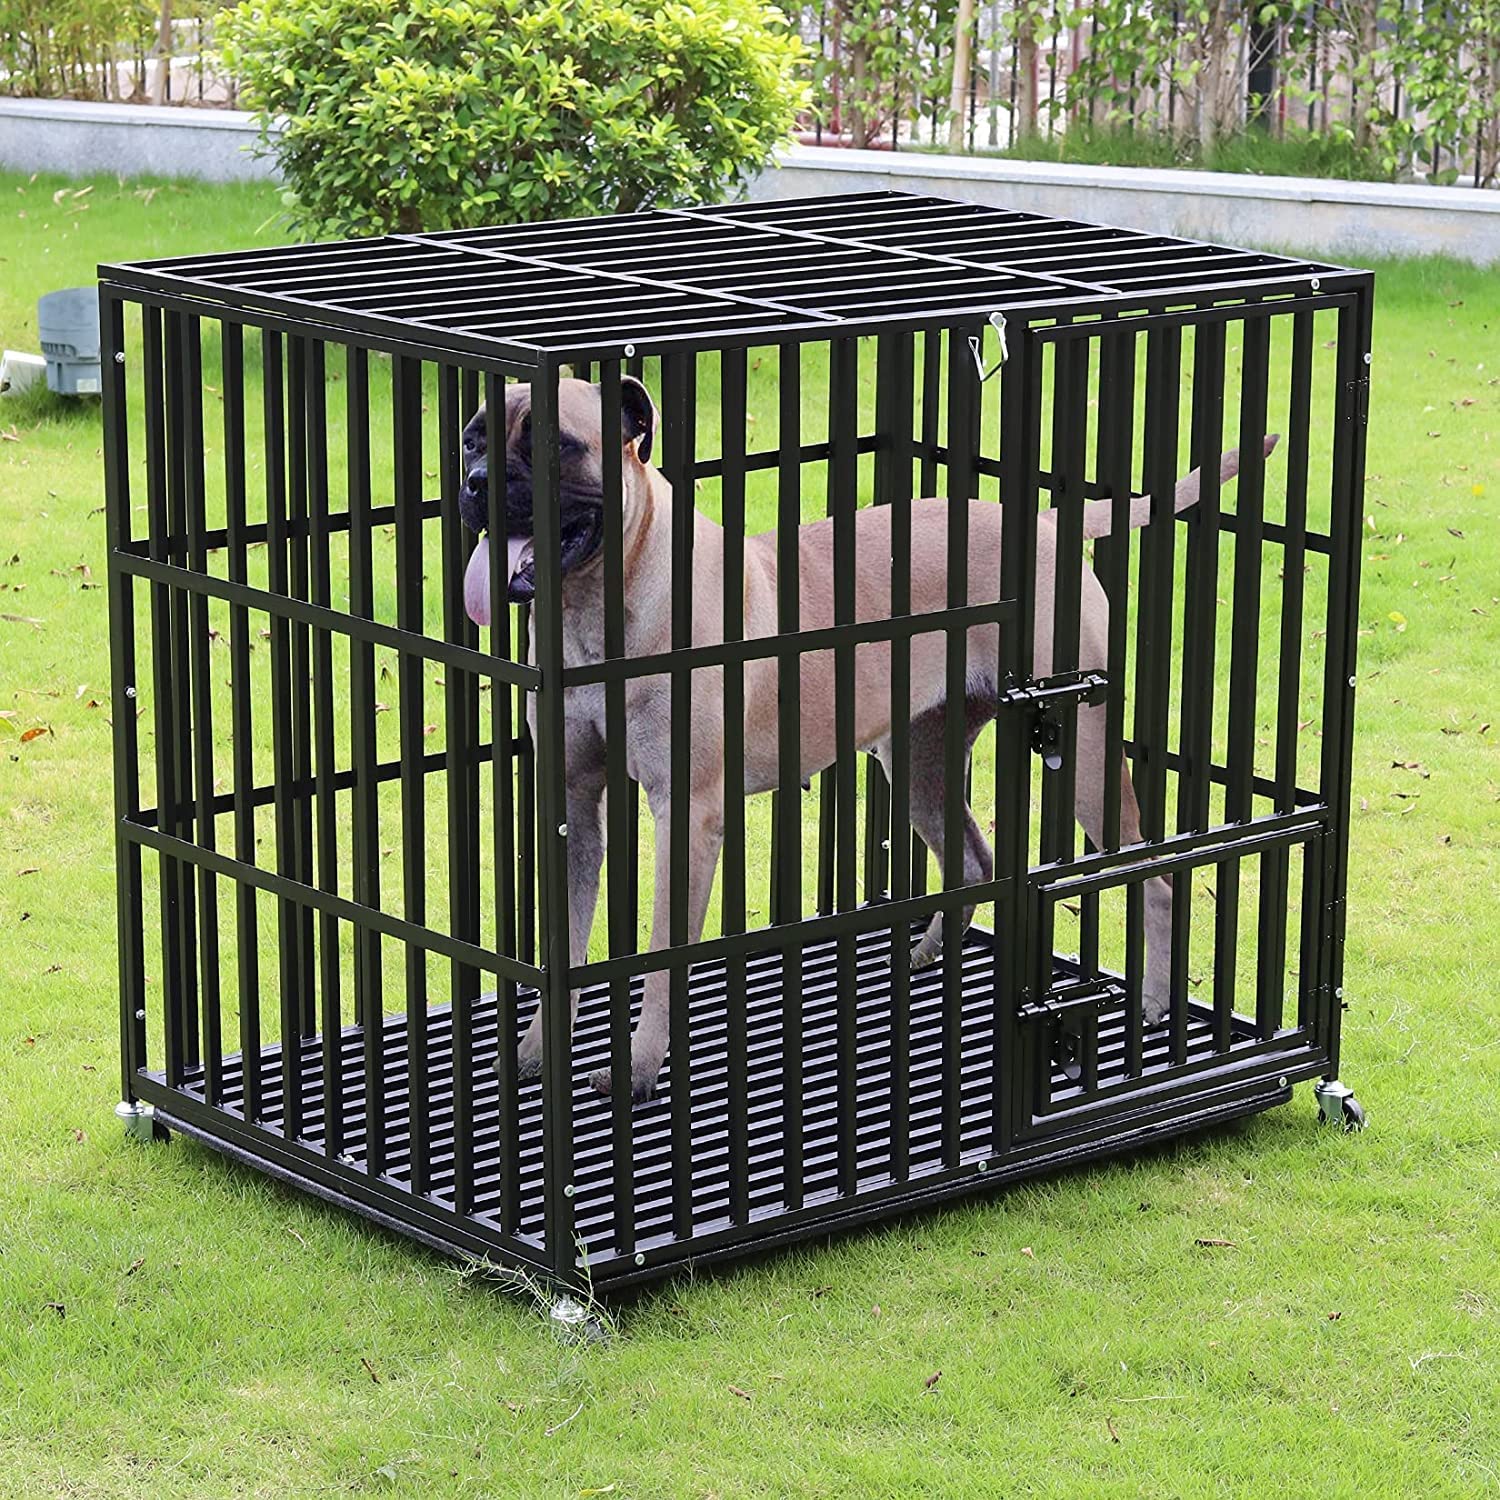 42 Tall XL Durable Tough Raised Dog Kennels and Crates with Bottom (NC)